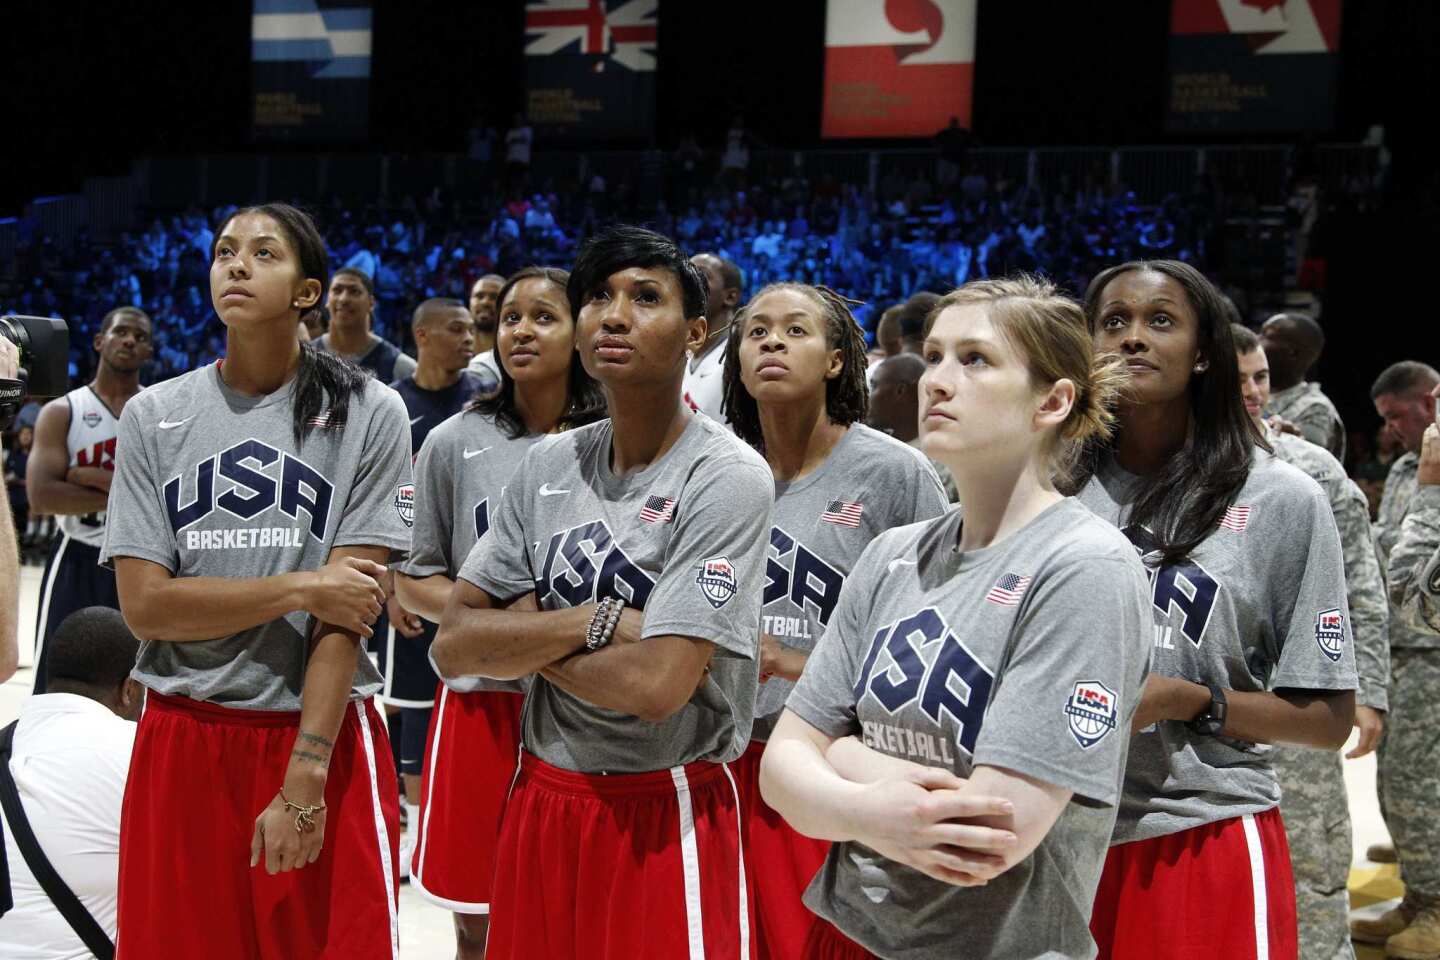 U.S. Women's Basketball Team members, from left, Candace Parker, Maya Moore, Angel McCoughtry, Seimone Augustus, Lindsay Whalen and Swin Cash watch a video before a men's practice in Washington on July 14.